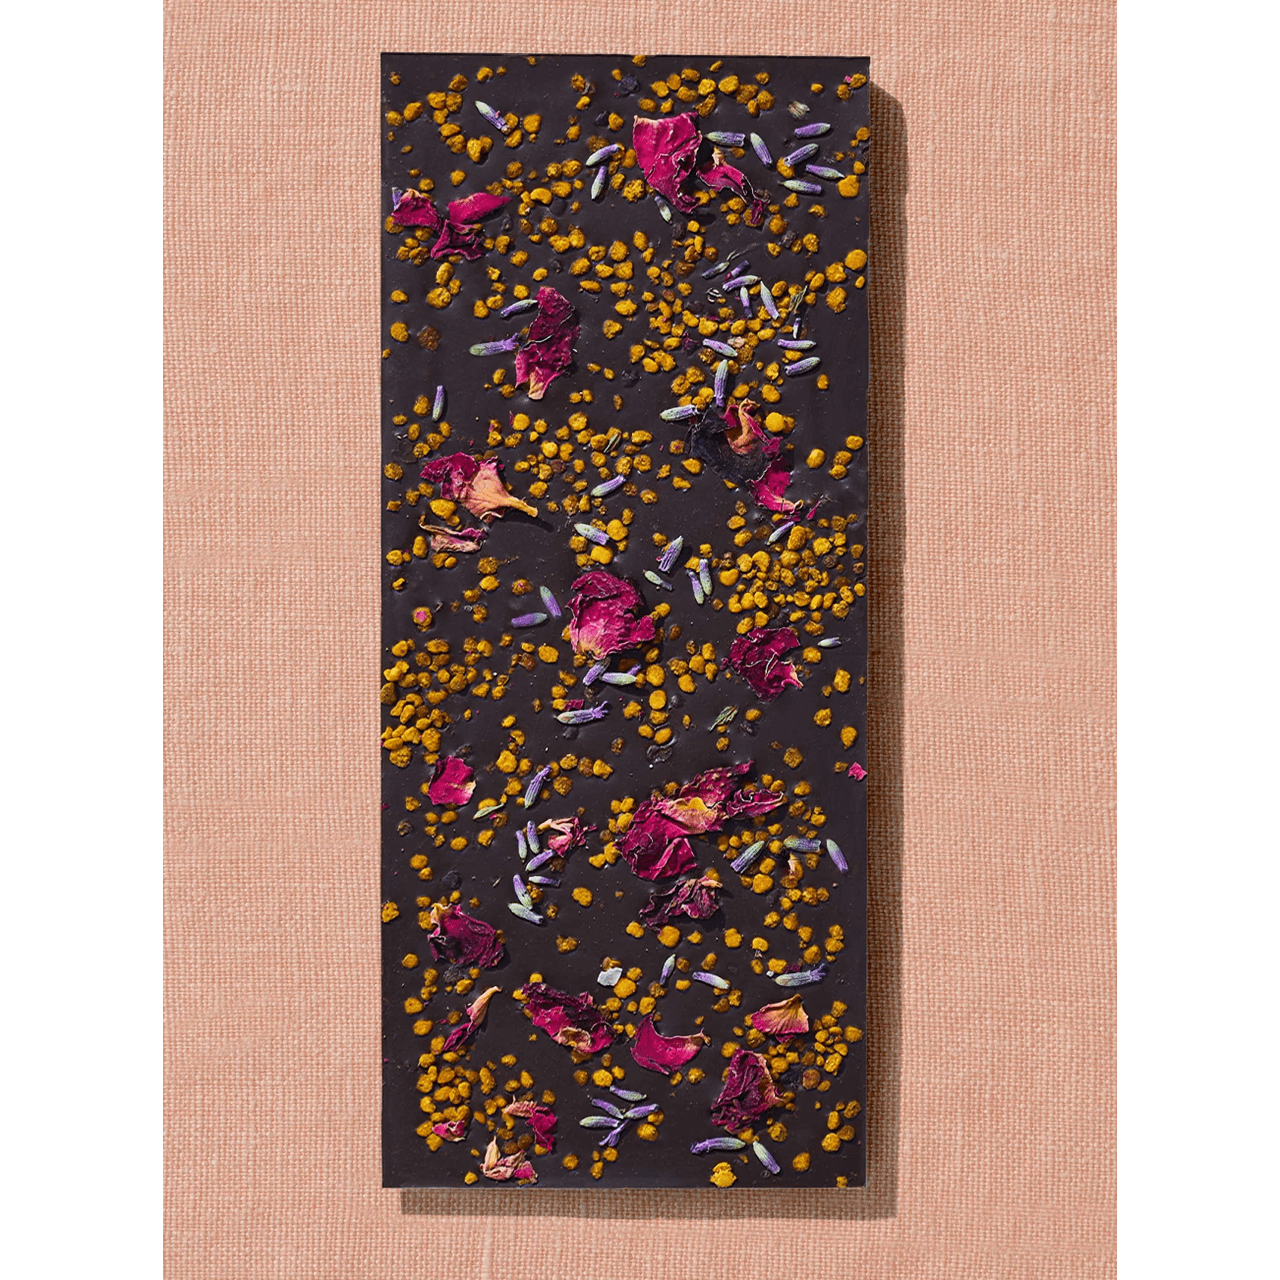 Spring & Mulberry Date Sweetened Chocolate Bar ~ Lavender, Bee Pollen, Rose Petal